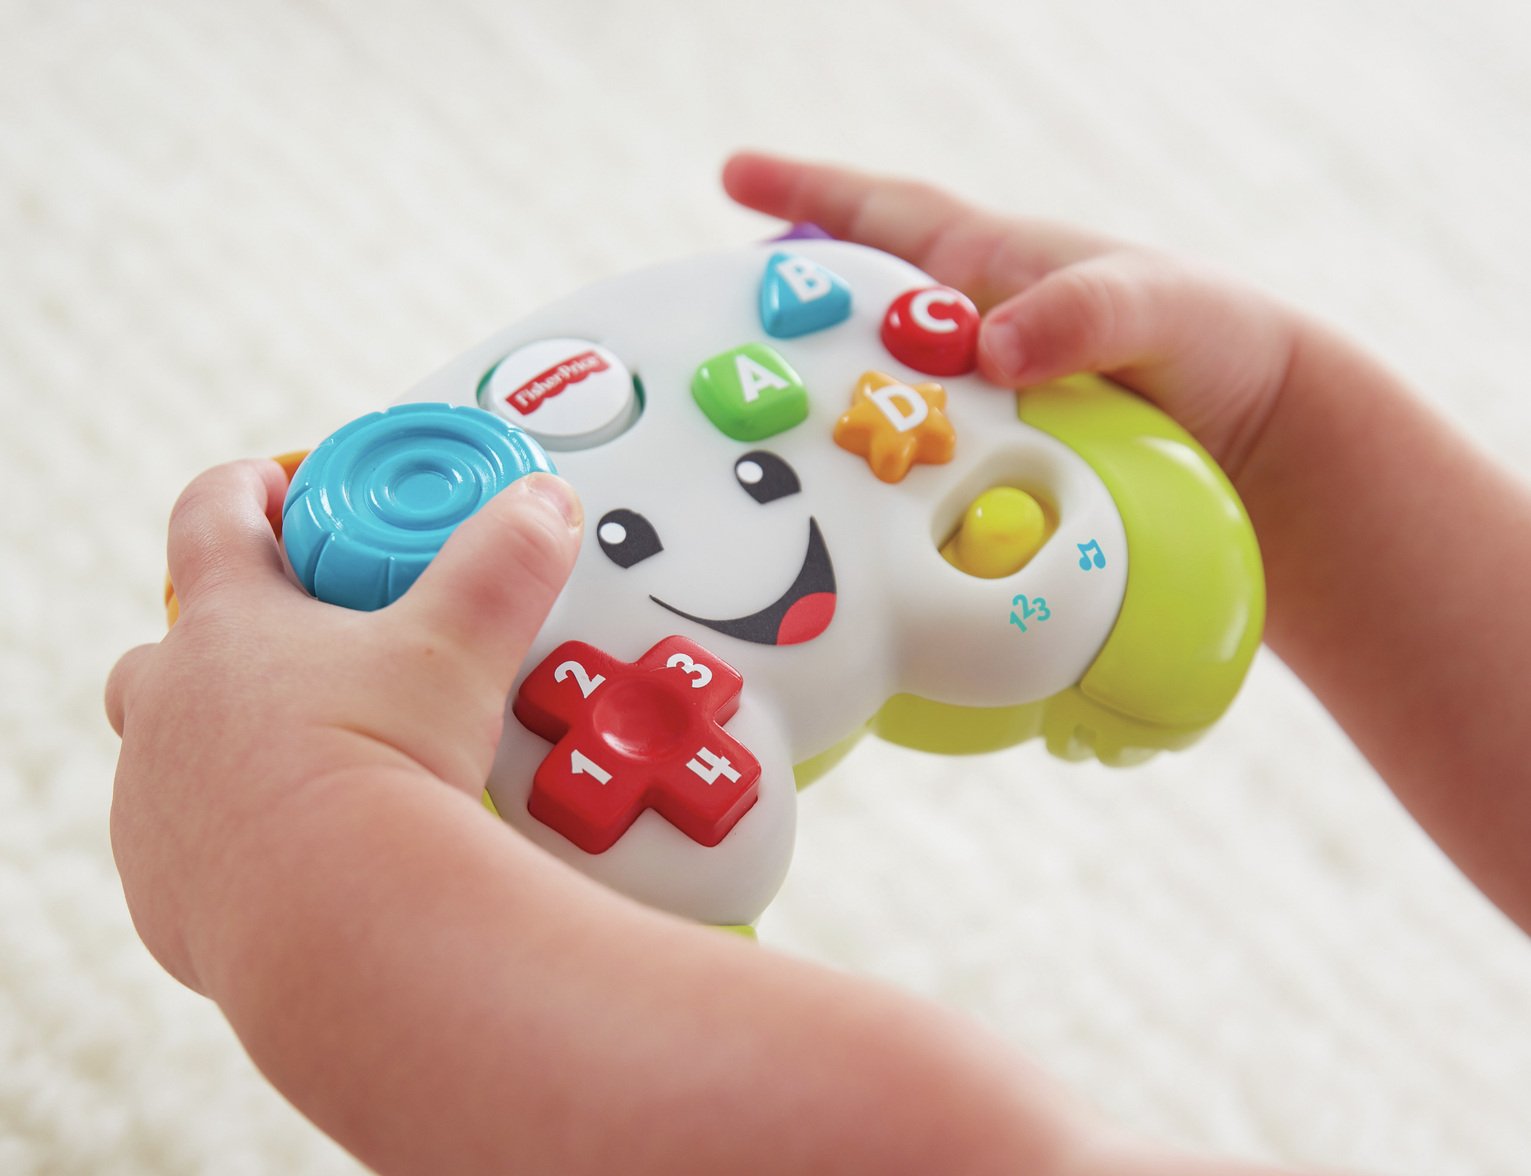 Fisher-Price Laugh & Learn Game & Learn Controller Review